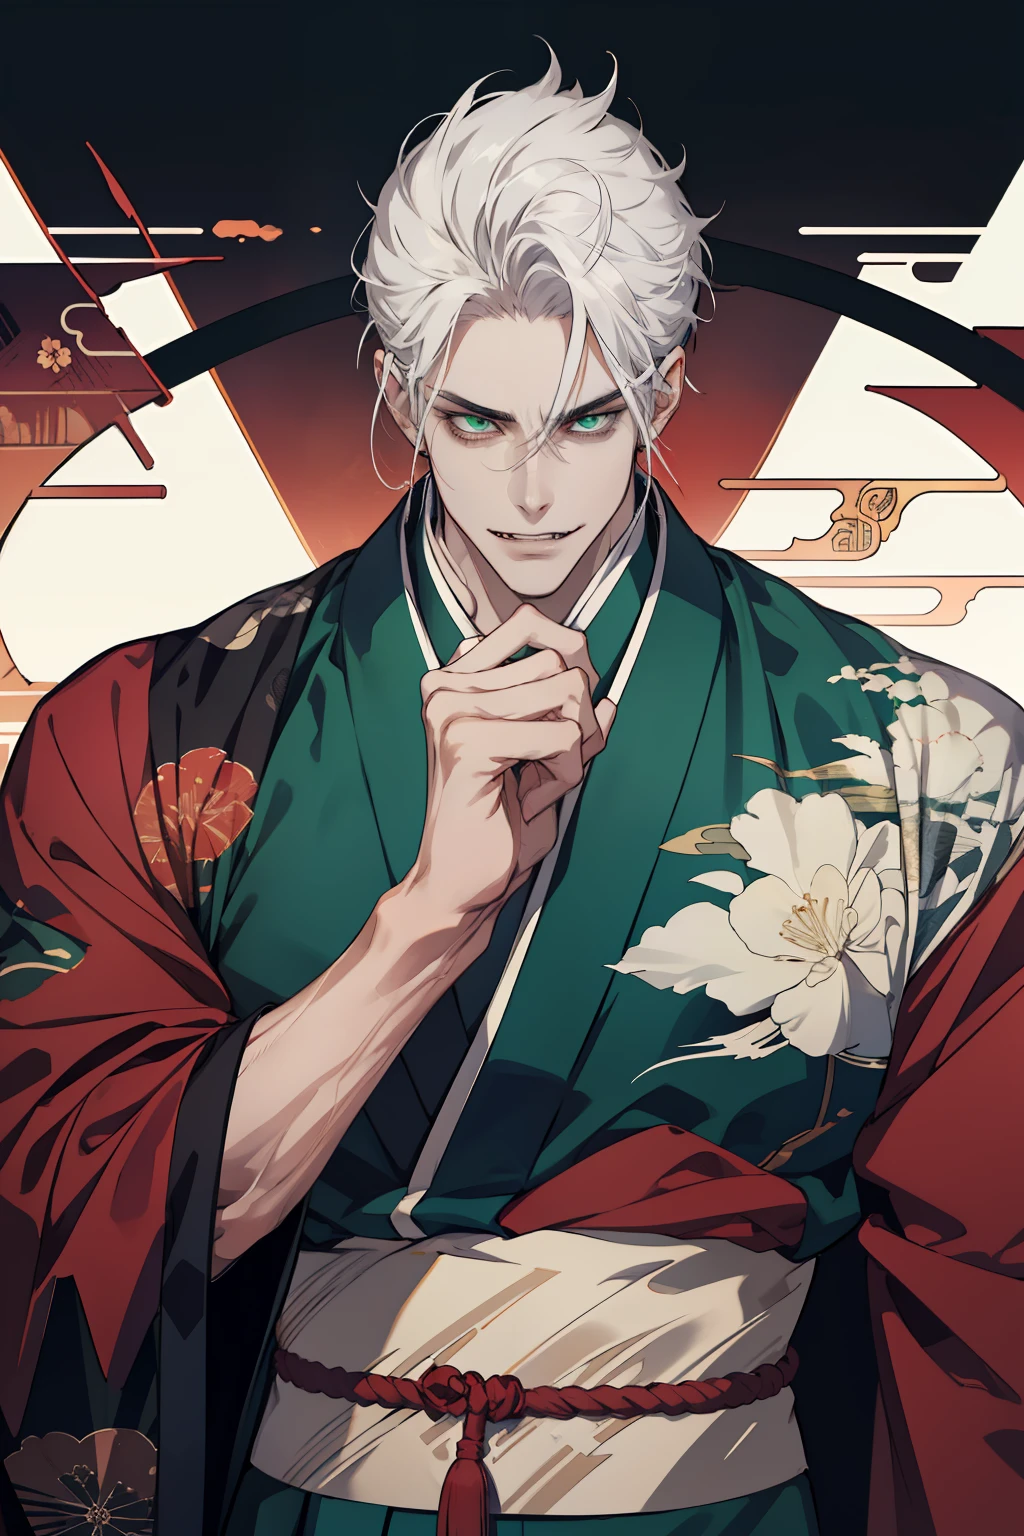 masculine prince, handsome anime pose, he has white hairs, high quality fanart, highly detailed exquisite fanart, anime handsome man, sakimichan frank franzzeta, tall anime guy with green eyes, broad shoulders, dark eyebrows, king, muscular, Chinese kimono, Chinese clothes, slicked back masculine hair, very masculine, strong, large forearms, slicked hair, gelled hair, sinister smile, sinister face, Wolfgang Goldenleonard,  Joo Jaekyung, clear eyes, beautfiul eyes, simply eyes, evil, sinister smile, dark eyes, evil expression, crazed expression, yandere, wide smile, teeth, fangs